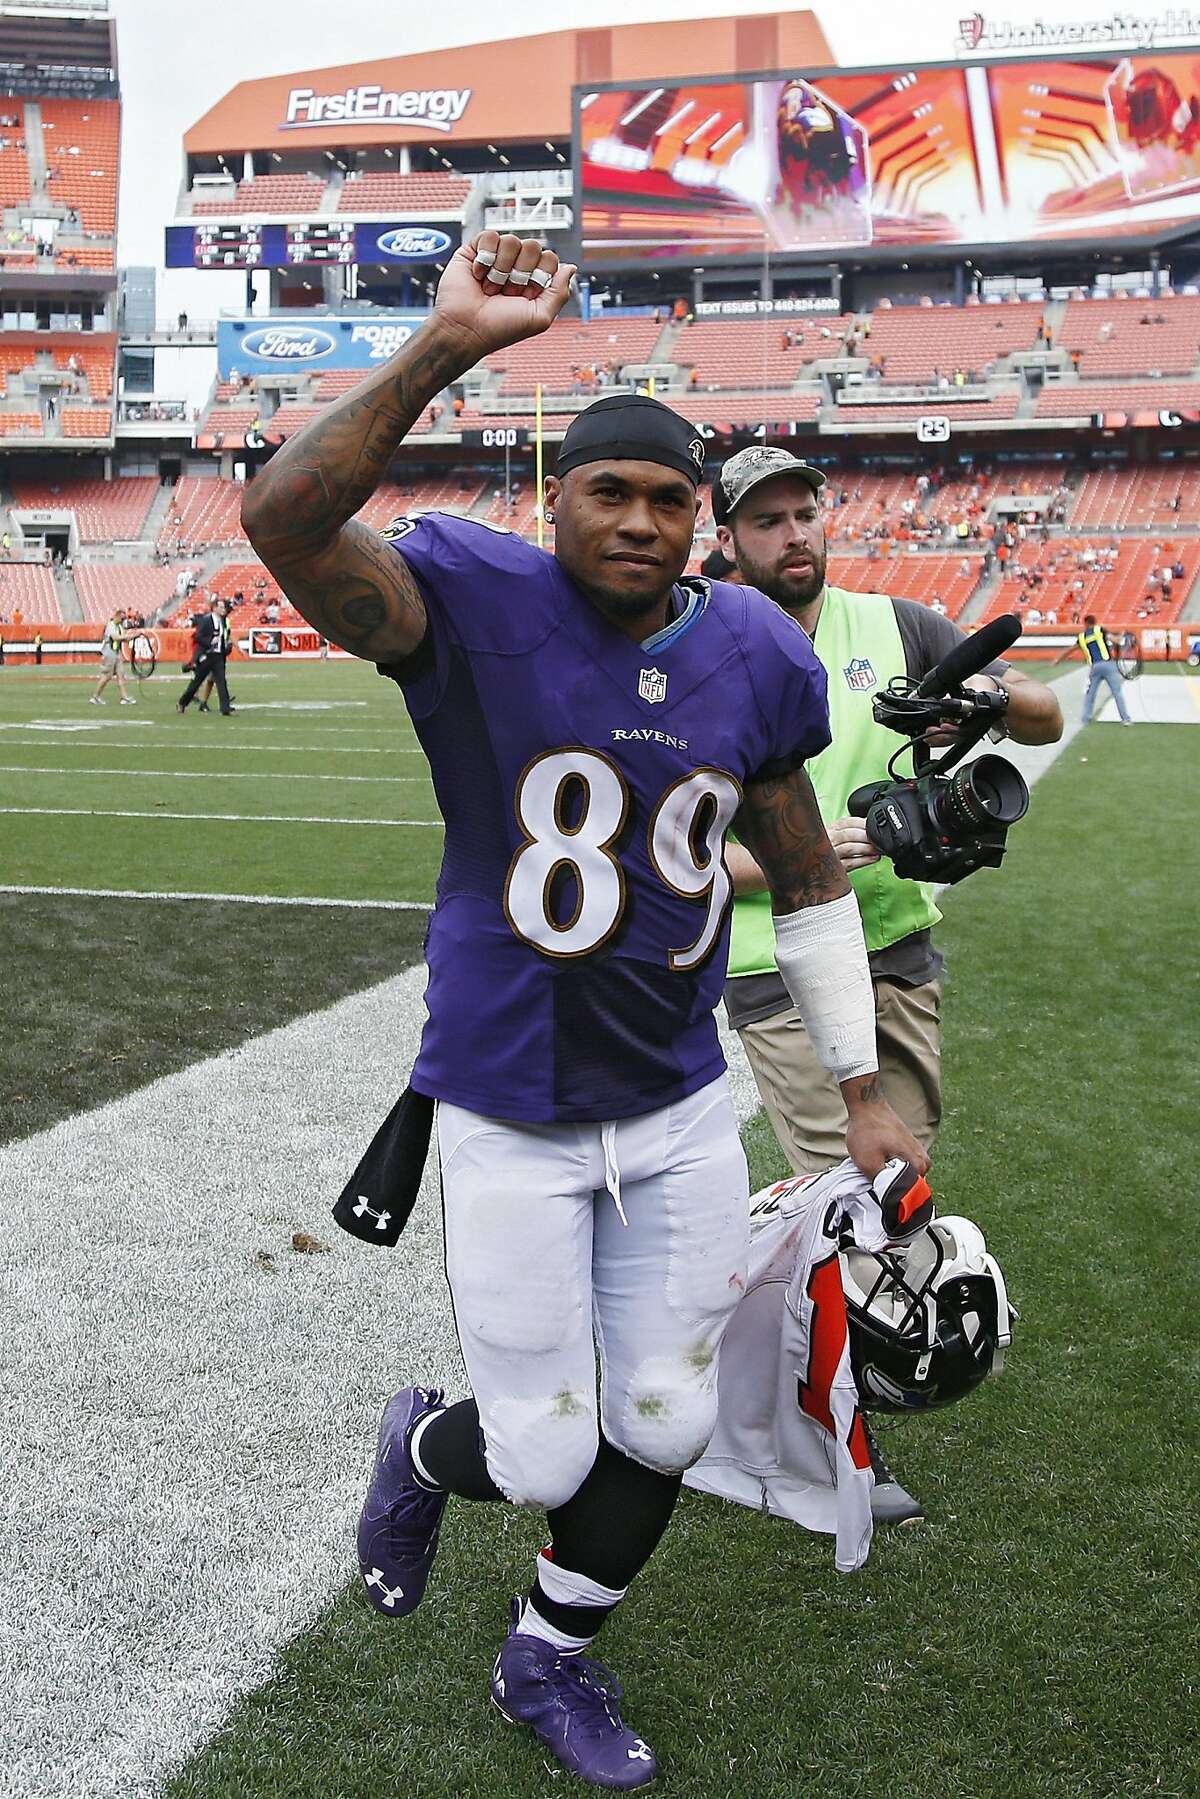 CLEVELAND, OH - SEPTEMBER 18: Steve Smith Sr. #89 of the Baltimore Ravens celebrates as he leaves the field after the game against the Cleveland Browns at FirstEnergy Stadium on September 18, 2016 in Cleveland, Ohio. The Ravens defeated the Browns 25-20. (Photo by Joe Robbins/Getty Images)